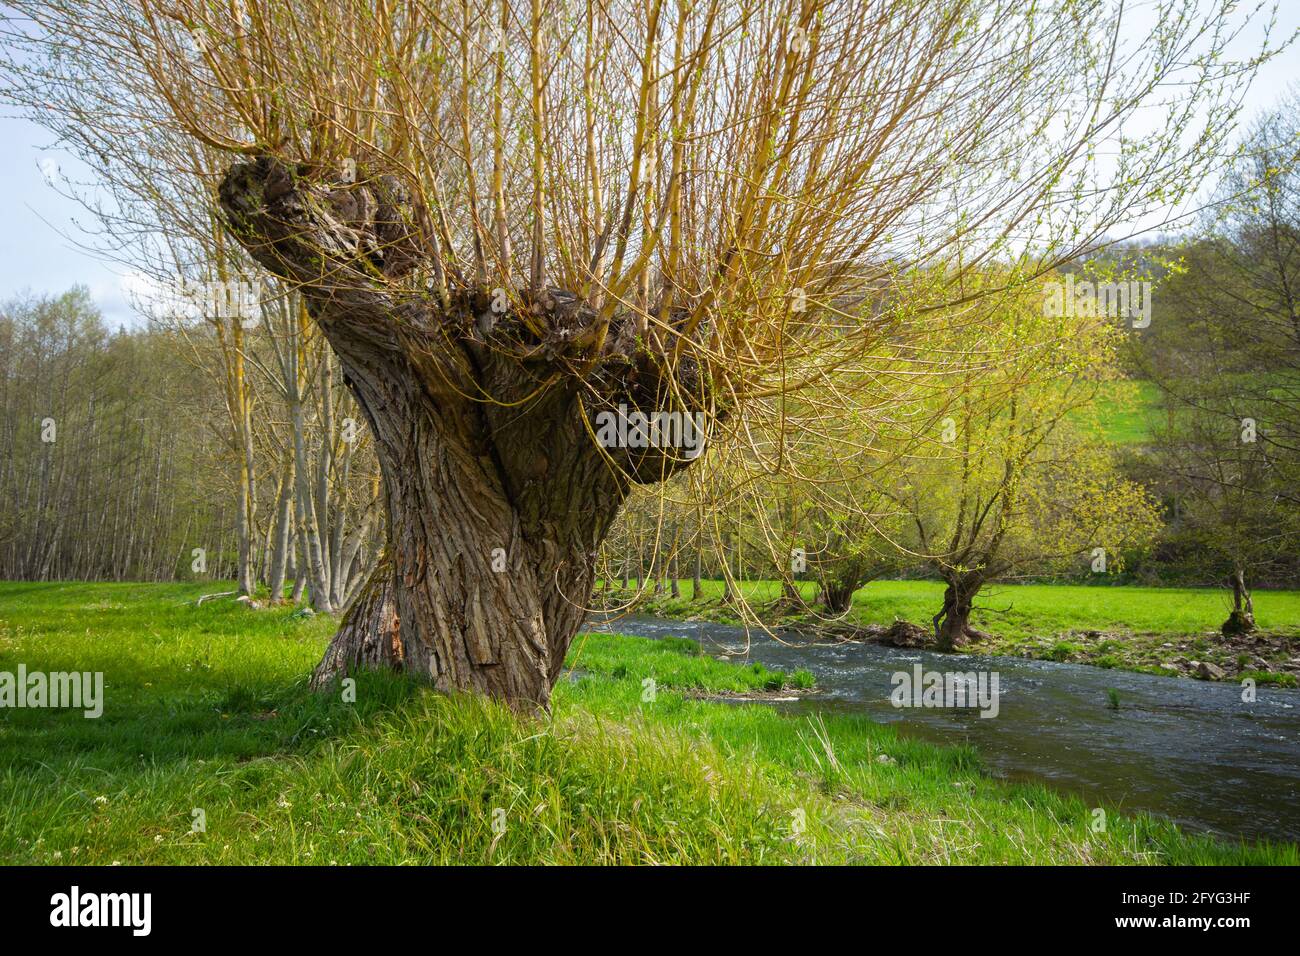 Twisted Basket Willow Tree with twig shoots in springtime at the Tauber River, Bavaria, South Germany Stock Photo